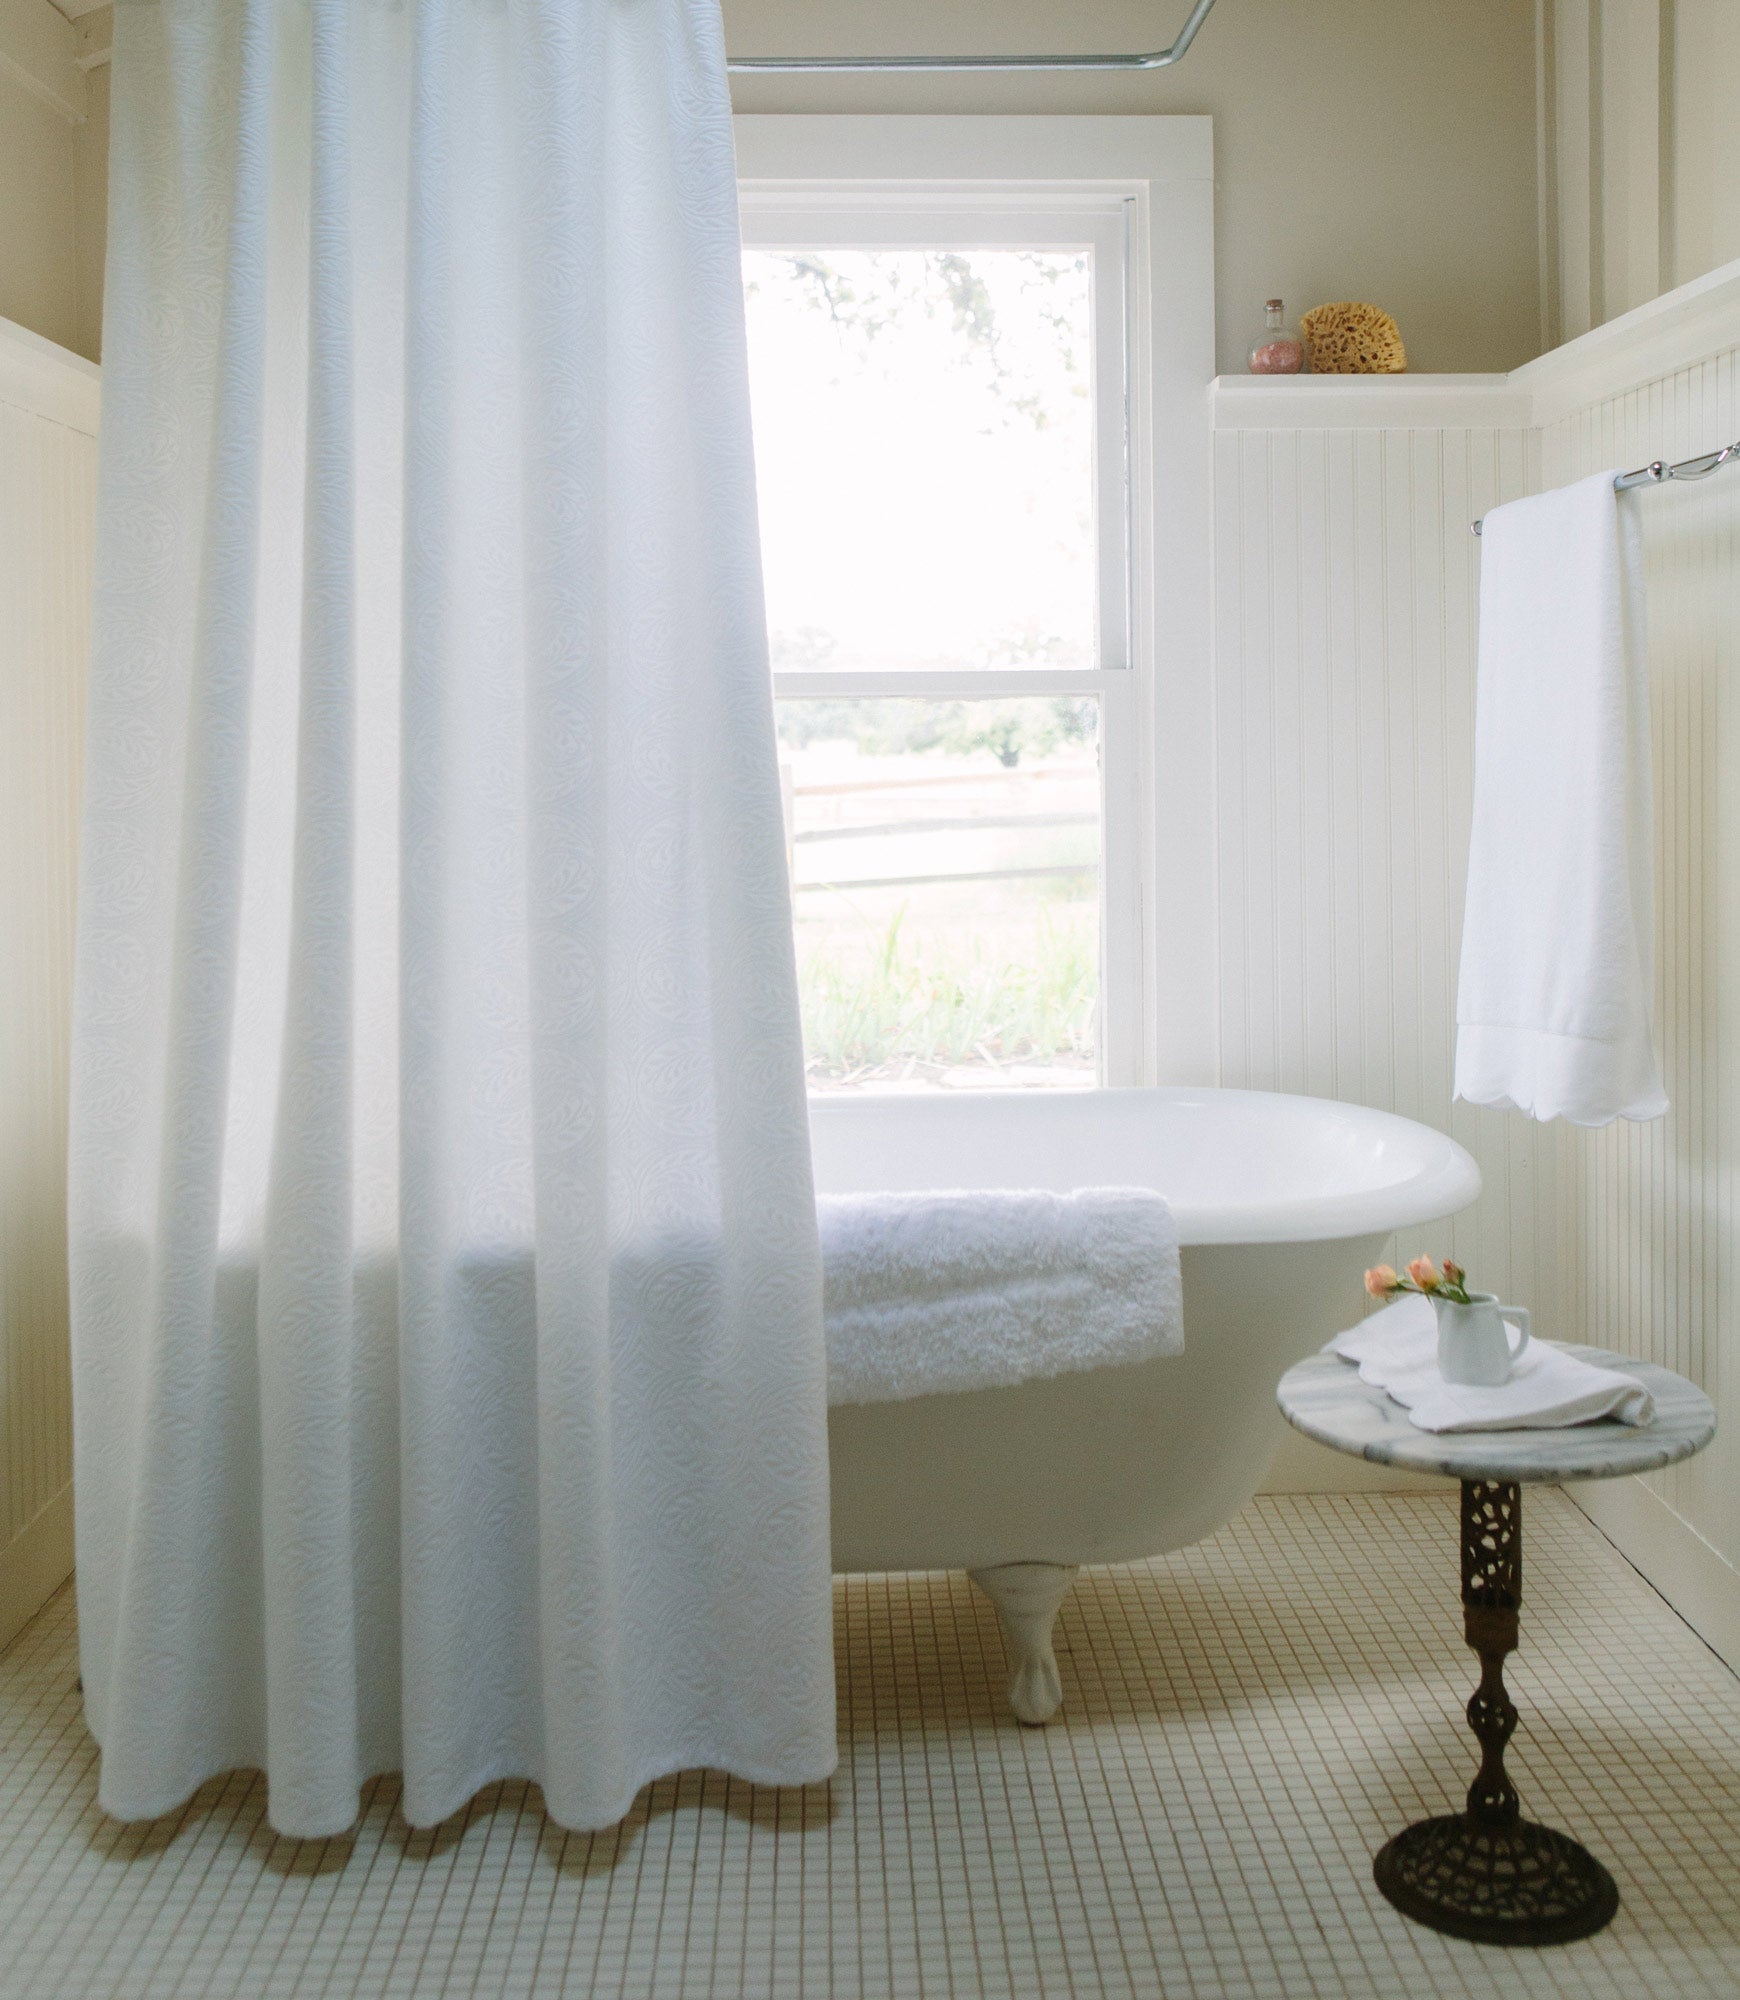 Vienna Matelassé Shower Curtain White Hanging In Bathroom Next To End Table